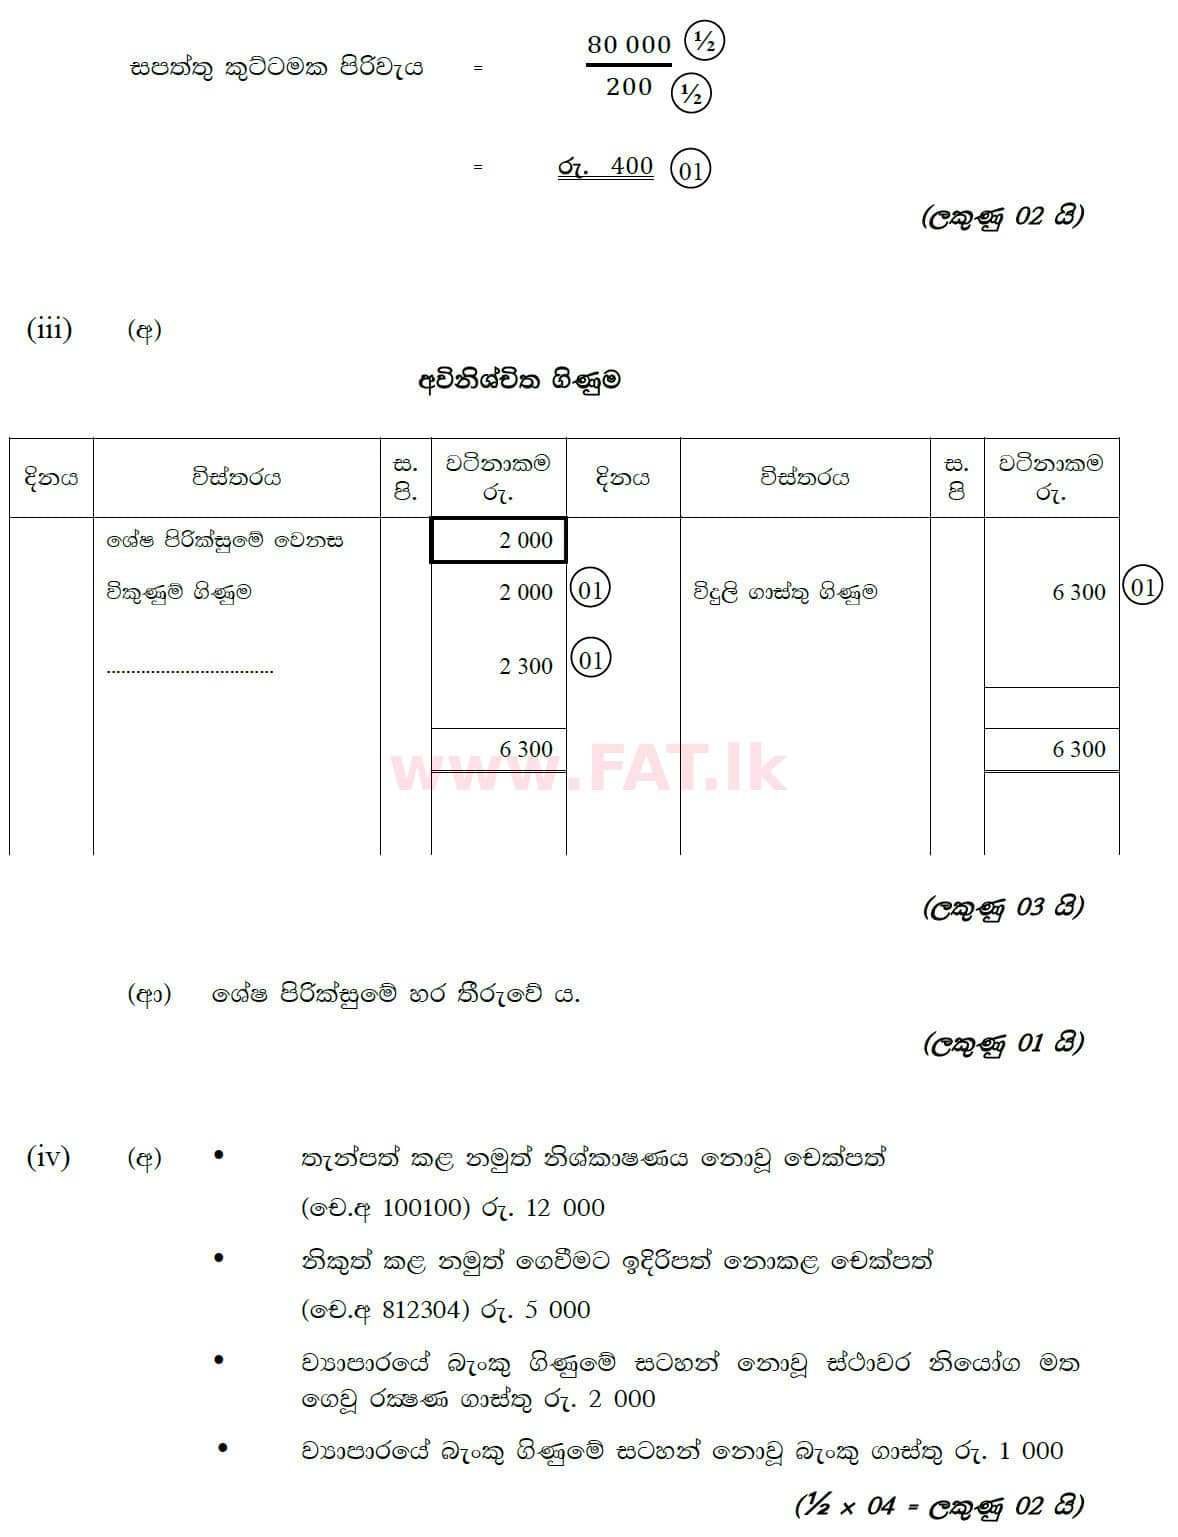 National Syllabus : Ordinary Level (O/L) Business and Accounting Studies - 2020 March - Paper II (සිංහල Medium) 6 5769